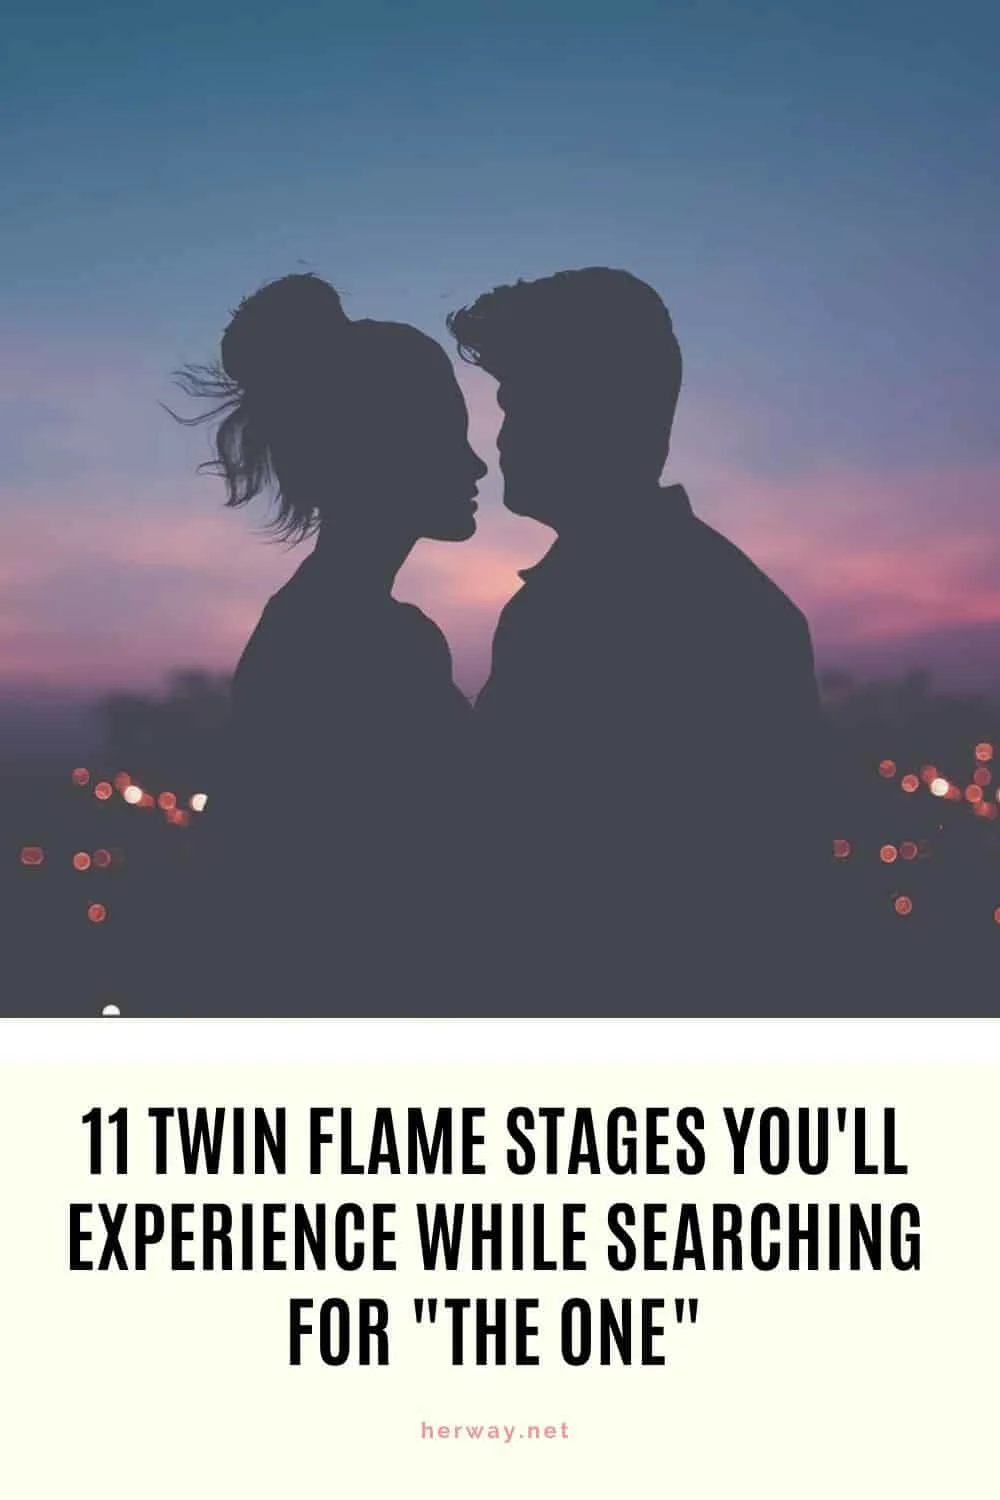 11 Twin Flame Stages You'll Experience While Searching For "The One"